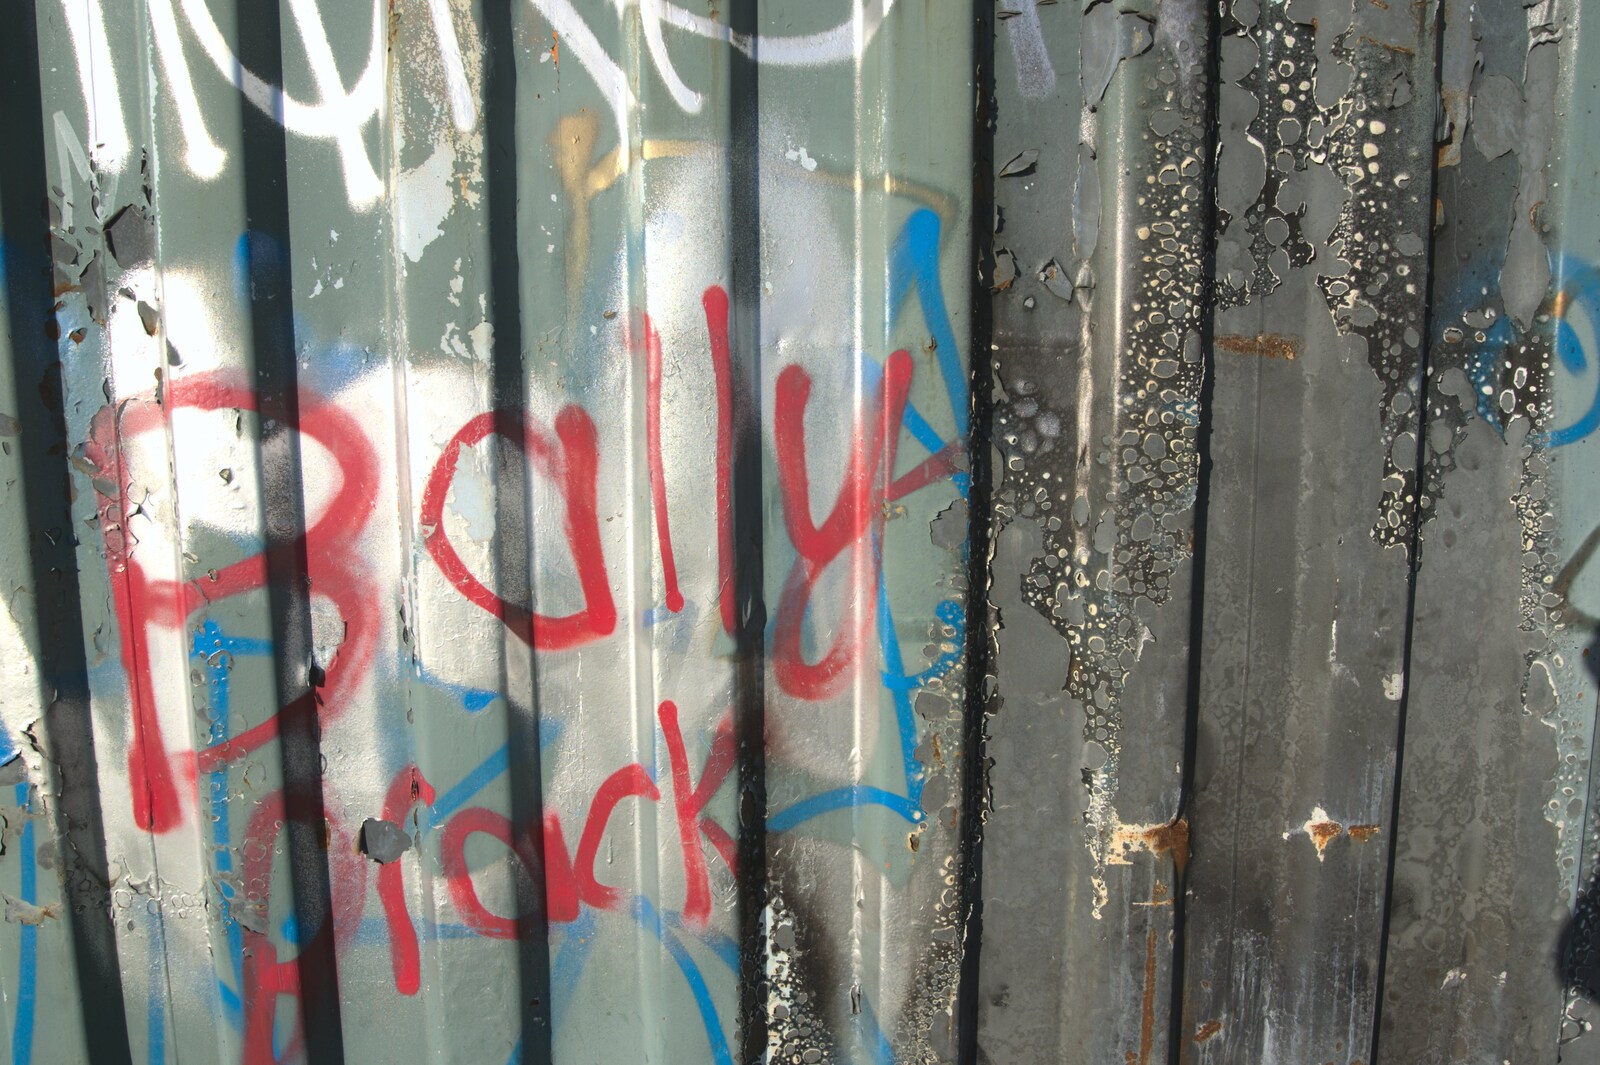 The Bally Brack massive have tagged a container from Monkstown Graffiti and Dereliction, County Dublin, Ireland - 26th December 2009